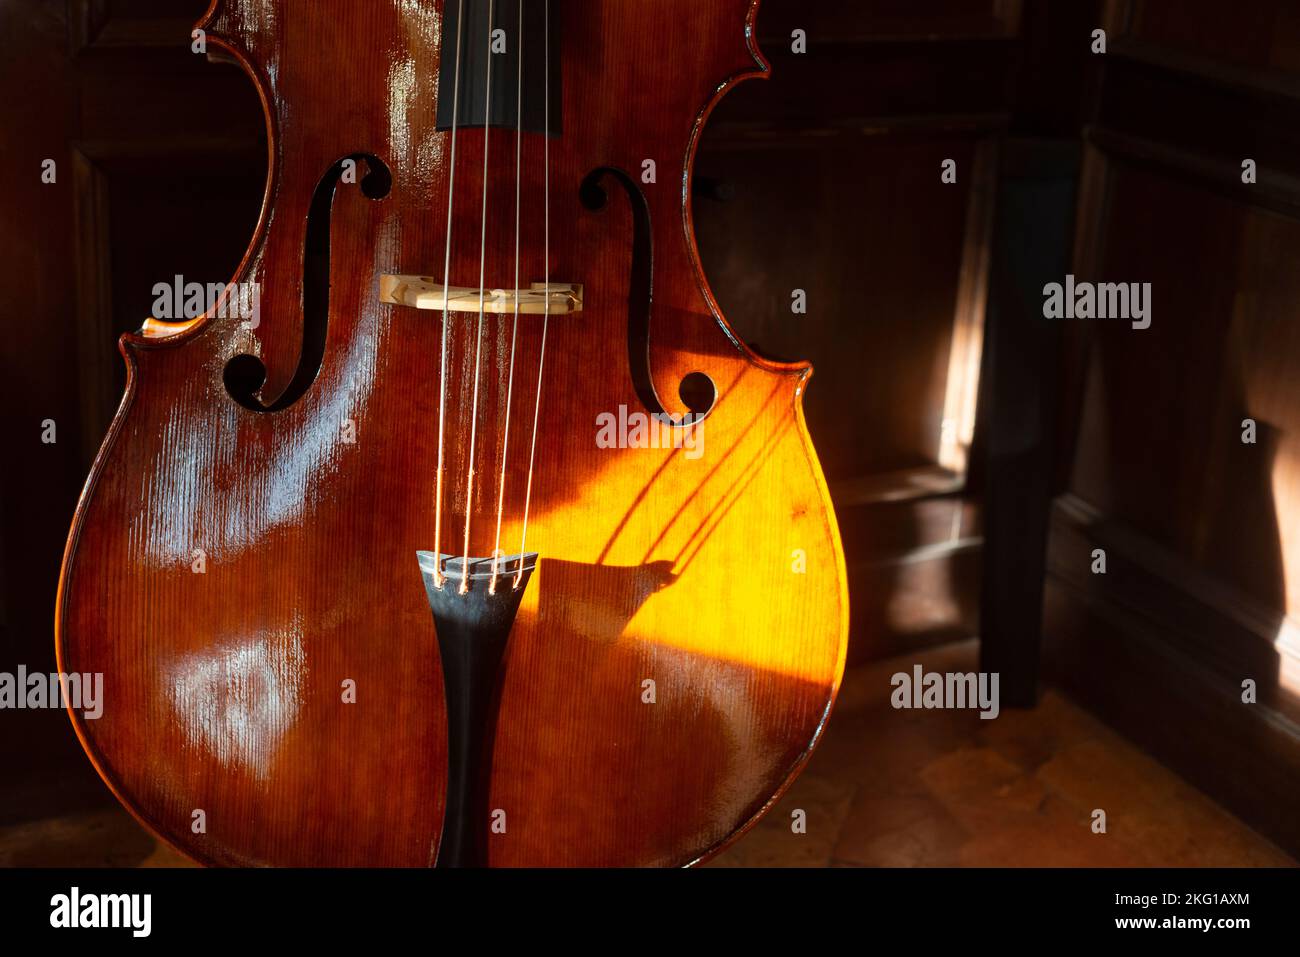 Close-up of Double Bass, Wooden Musical Instrument Stock Photo